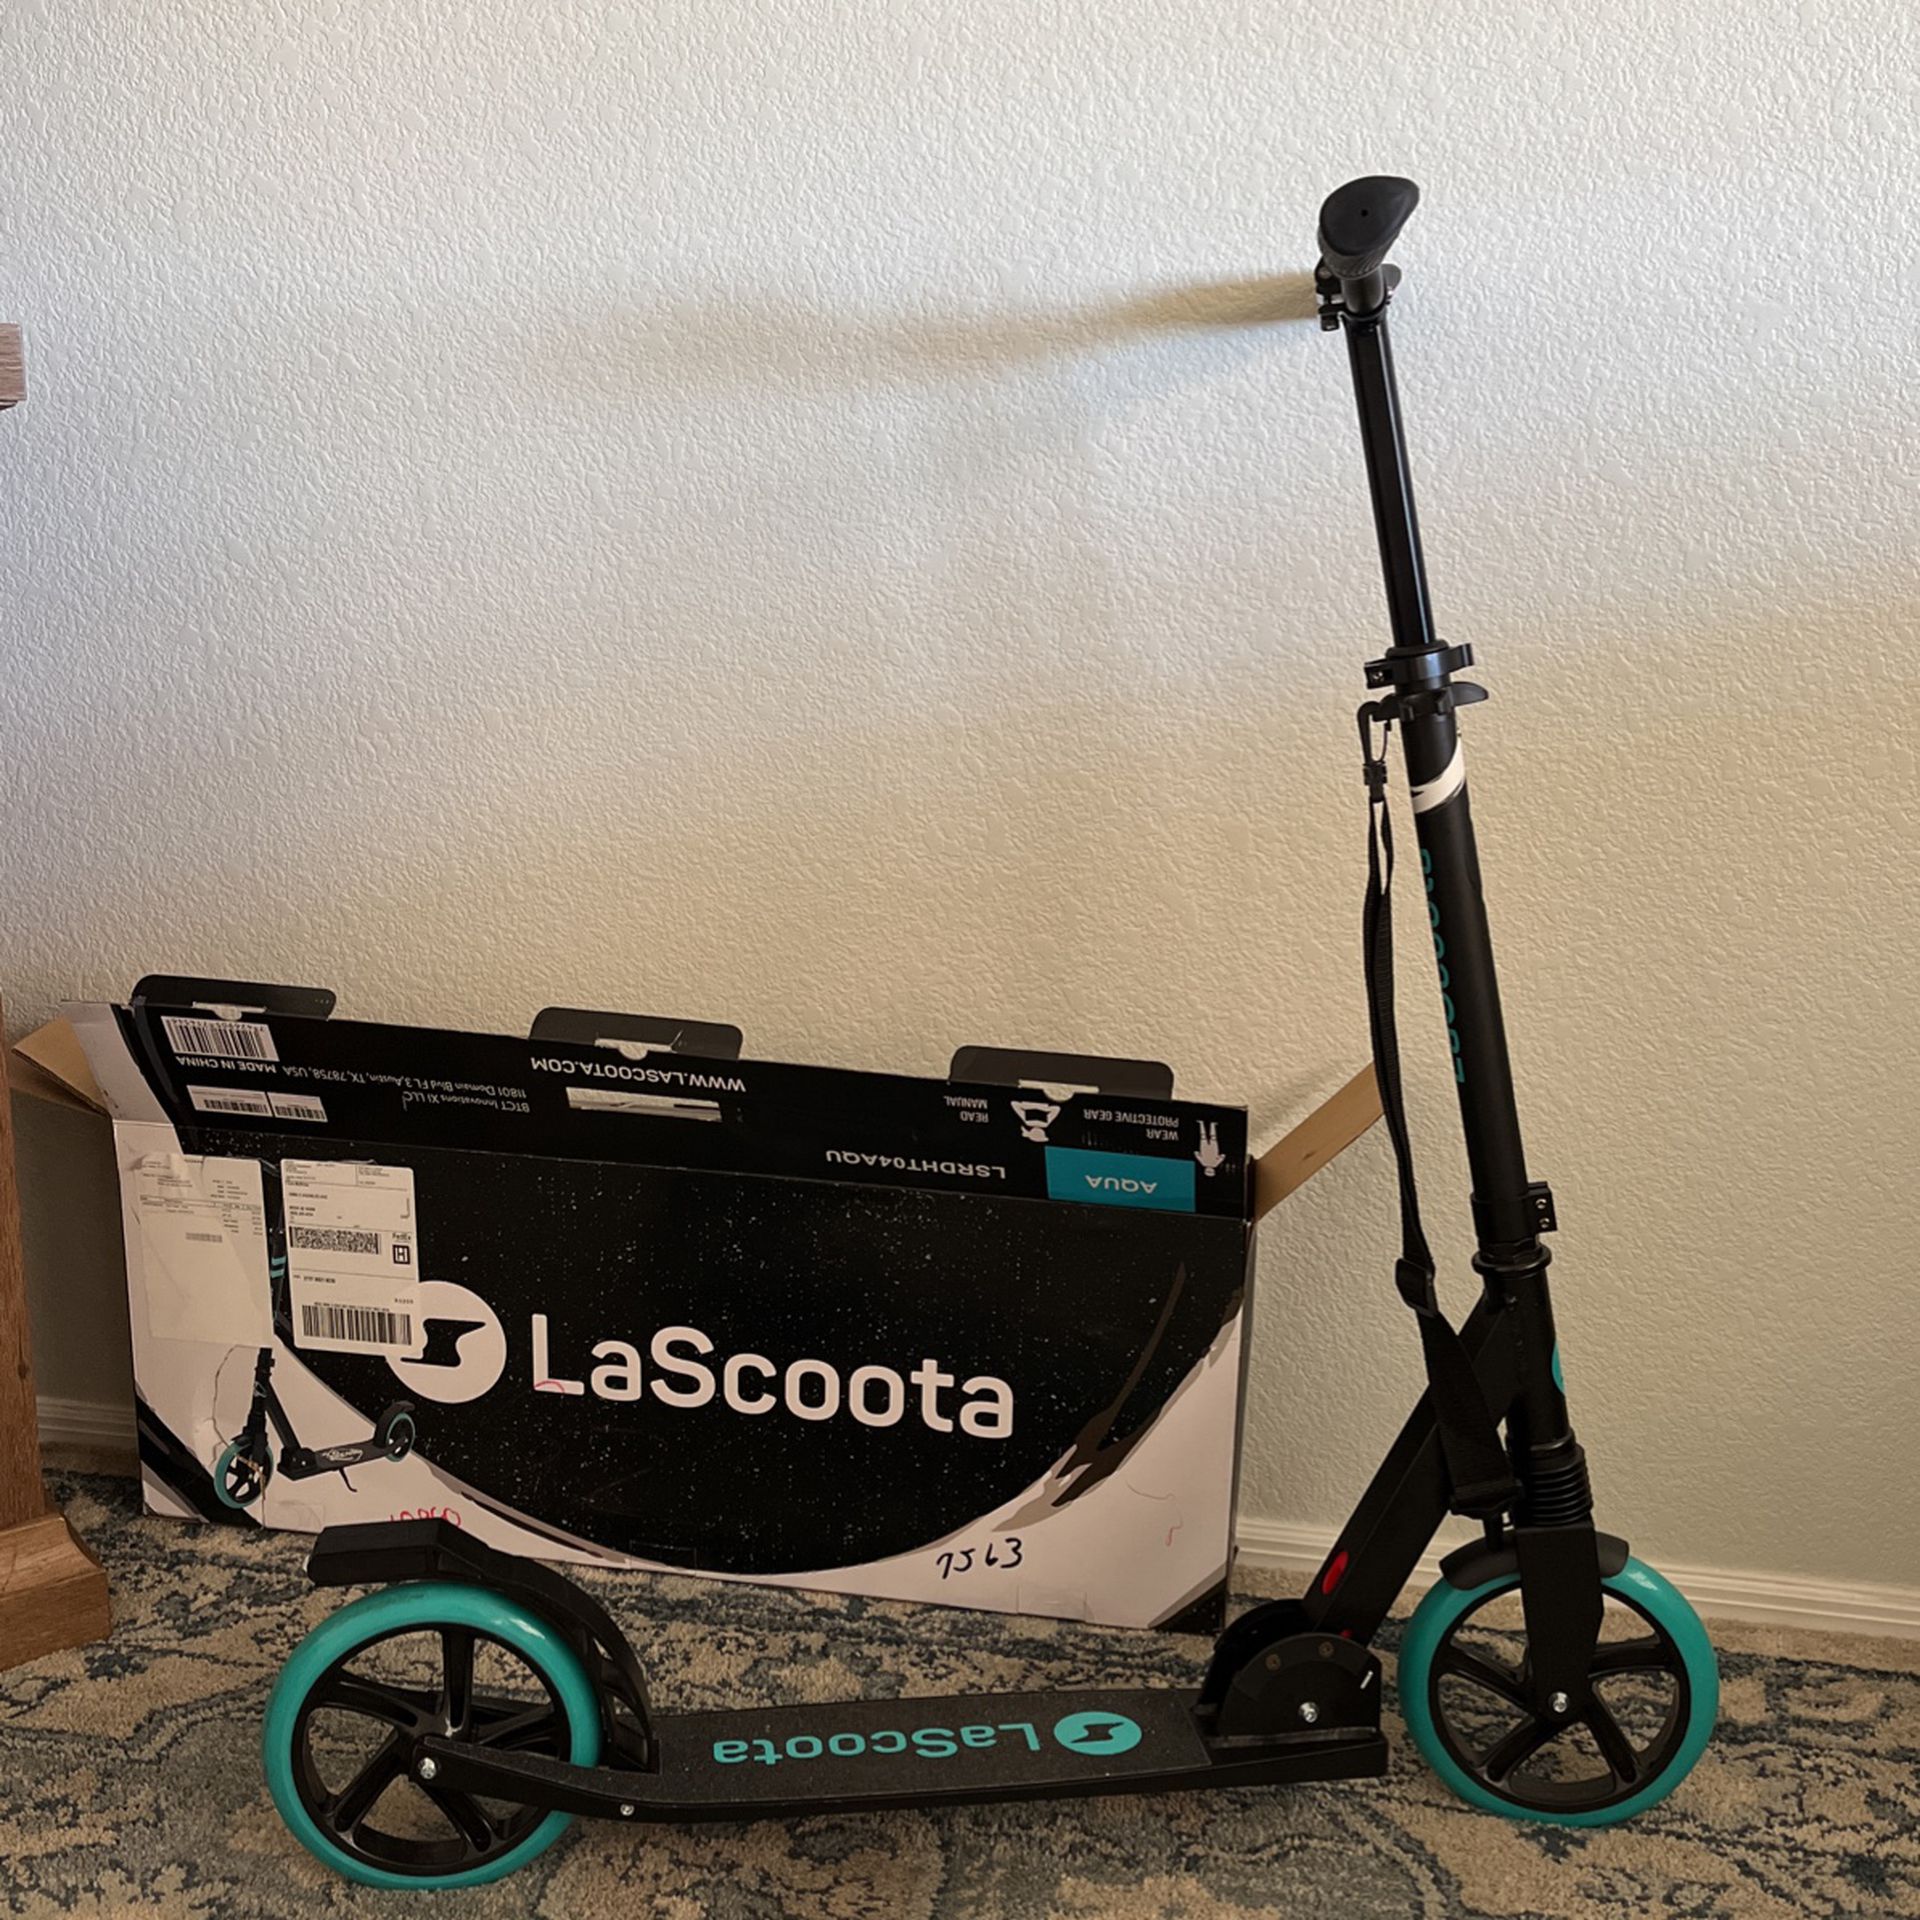 LaScoota Adult Sized Scooter,  Folds With A Carrying Strap. New $50.00..